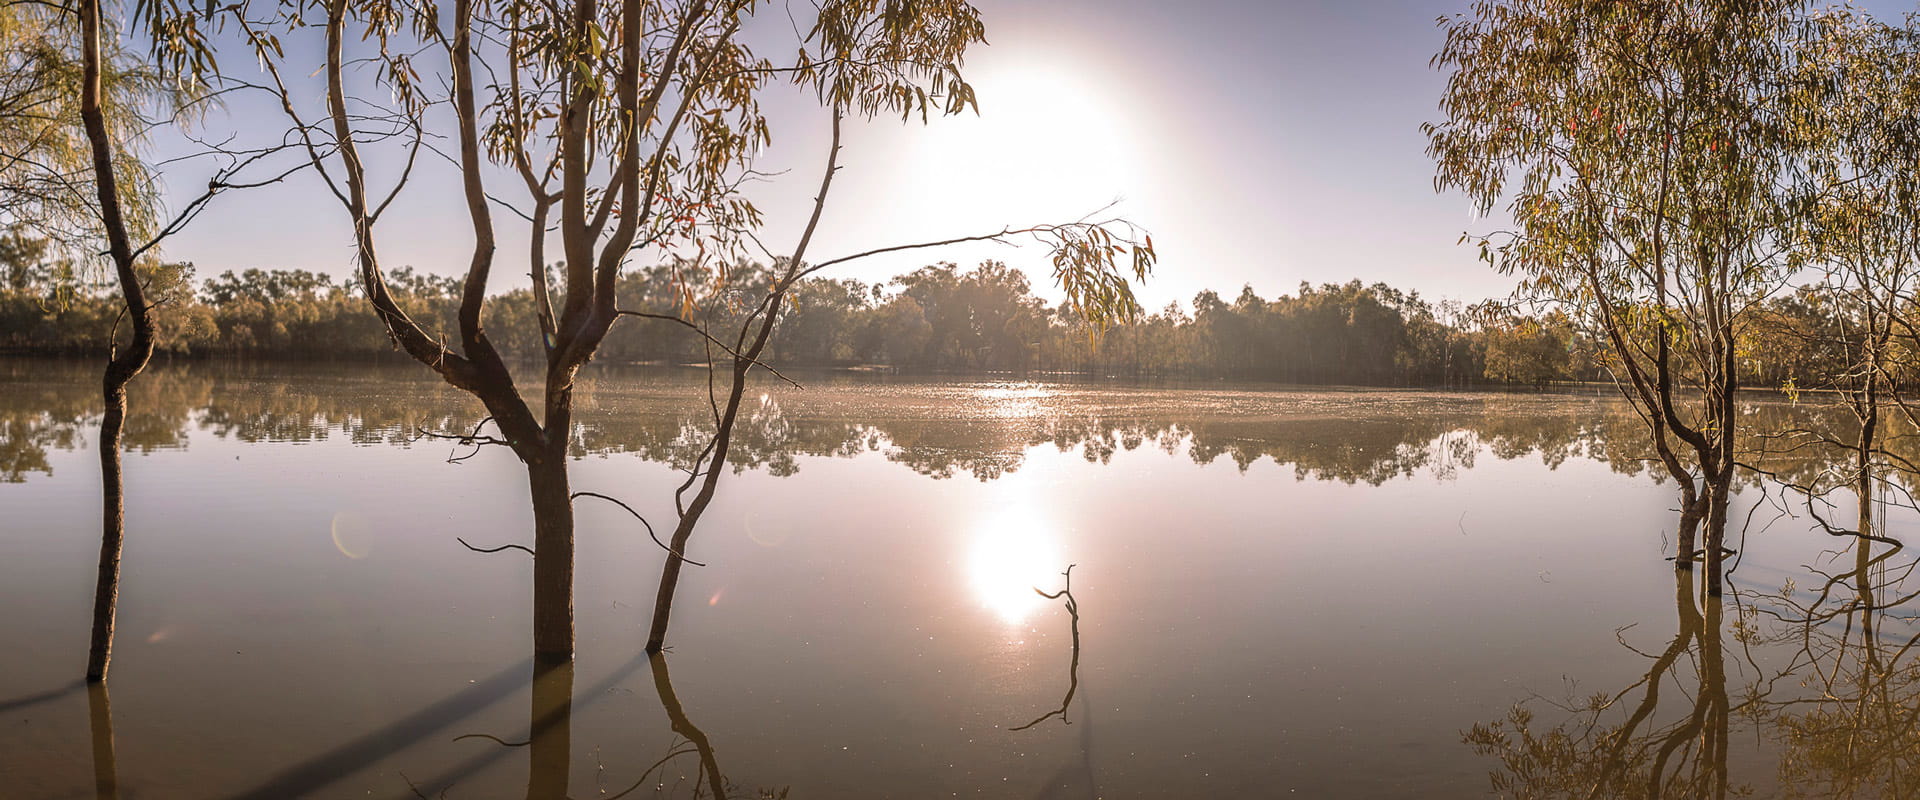 Sunlight glistening on a serene lake bordered by bushland trees and scrub.